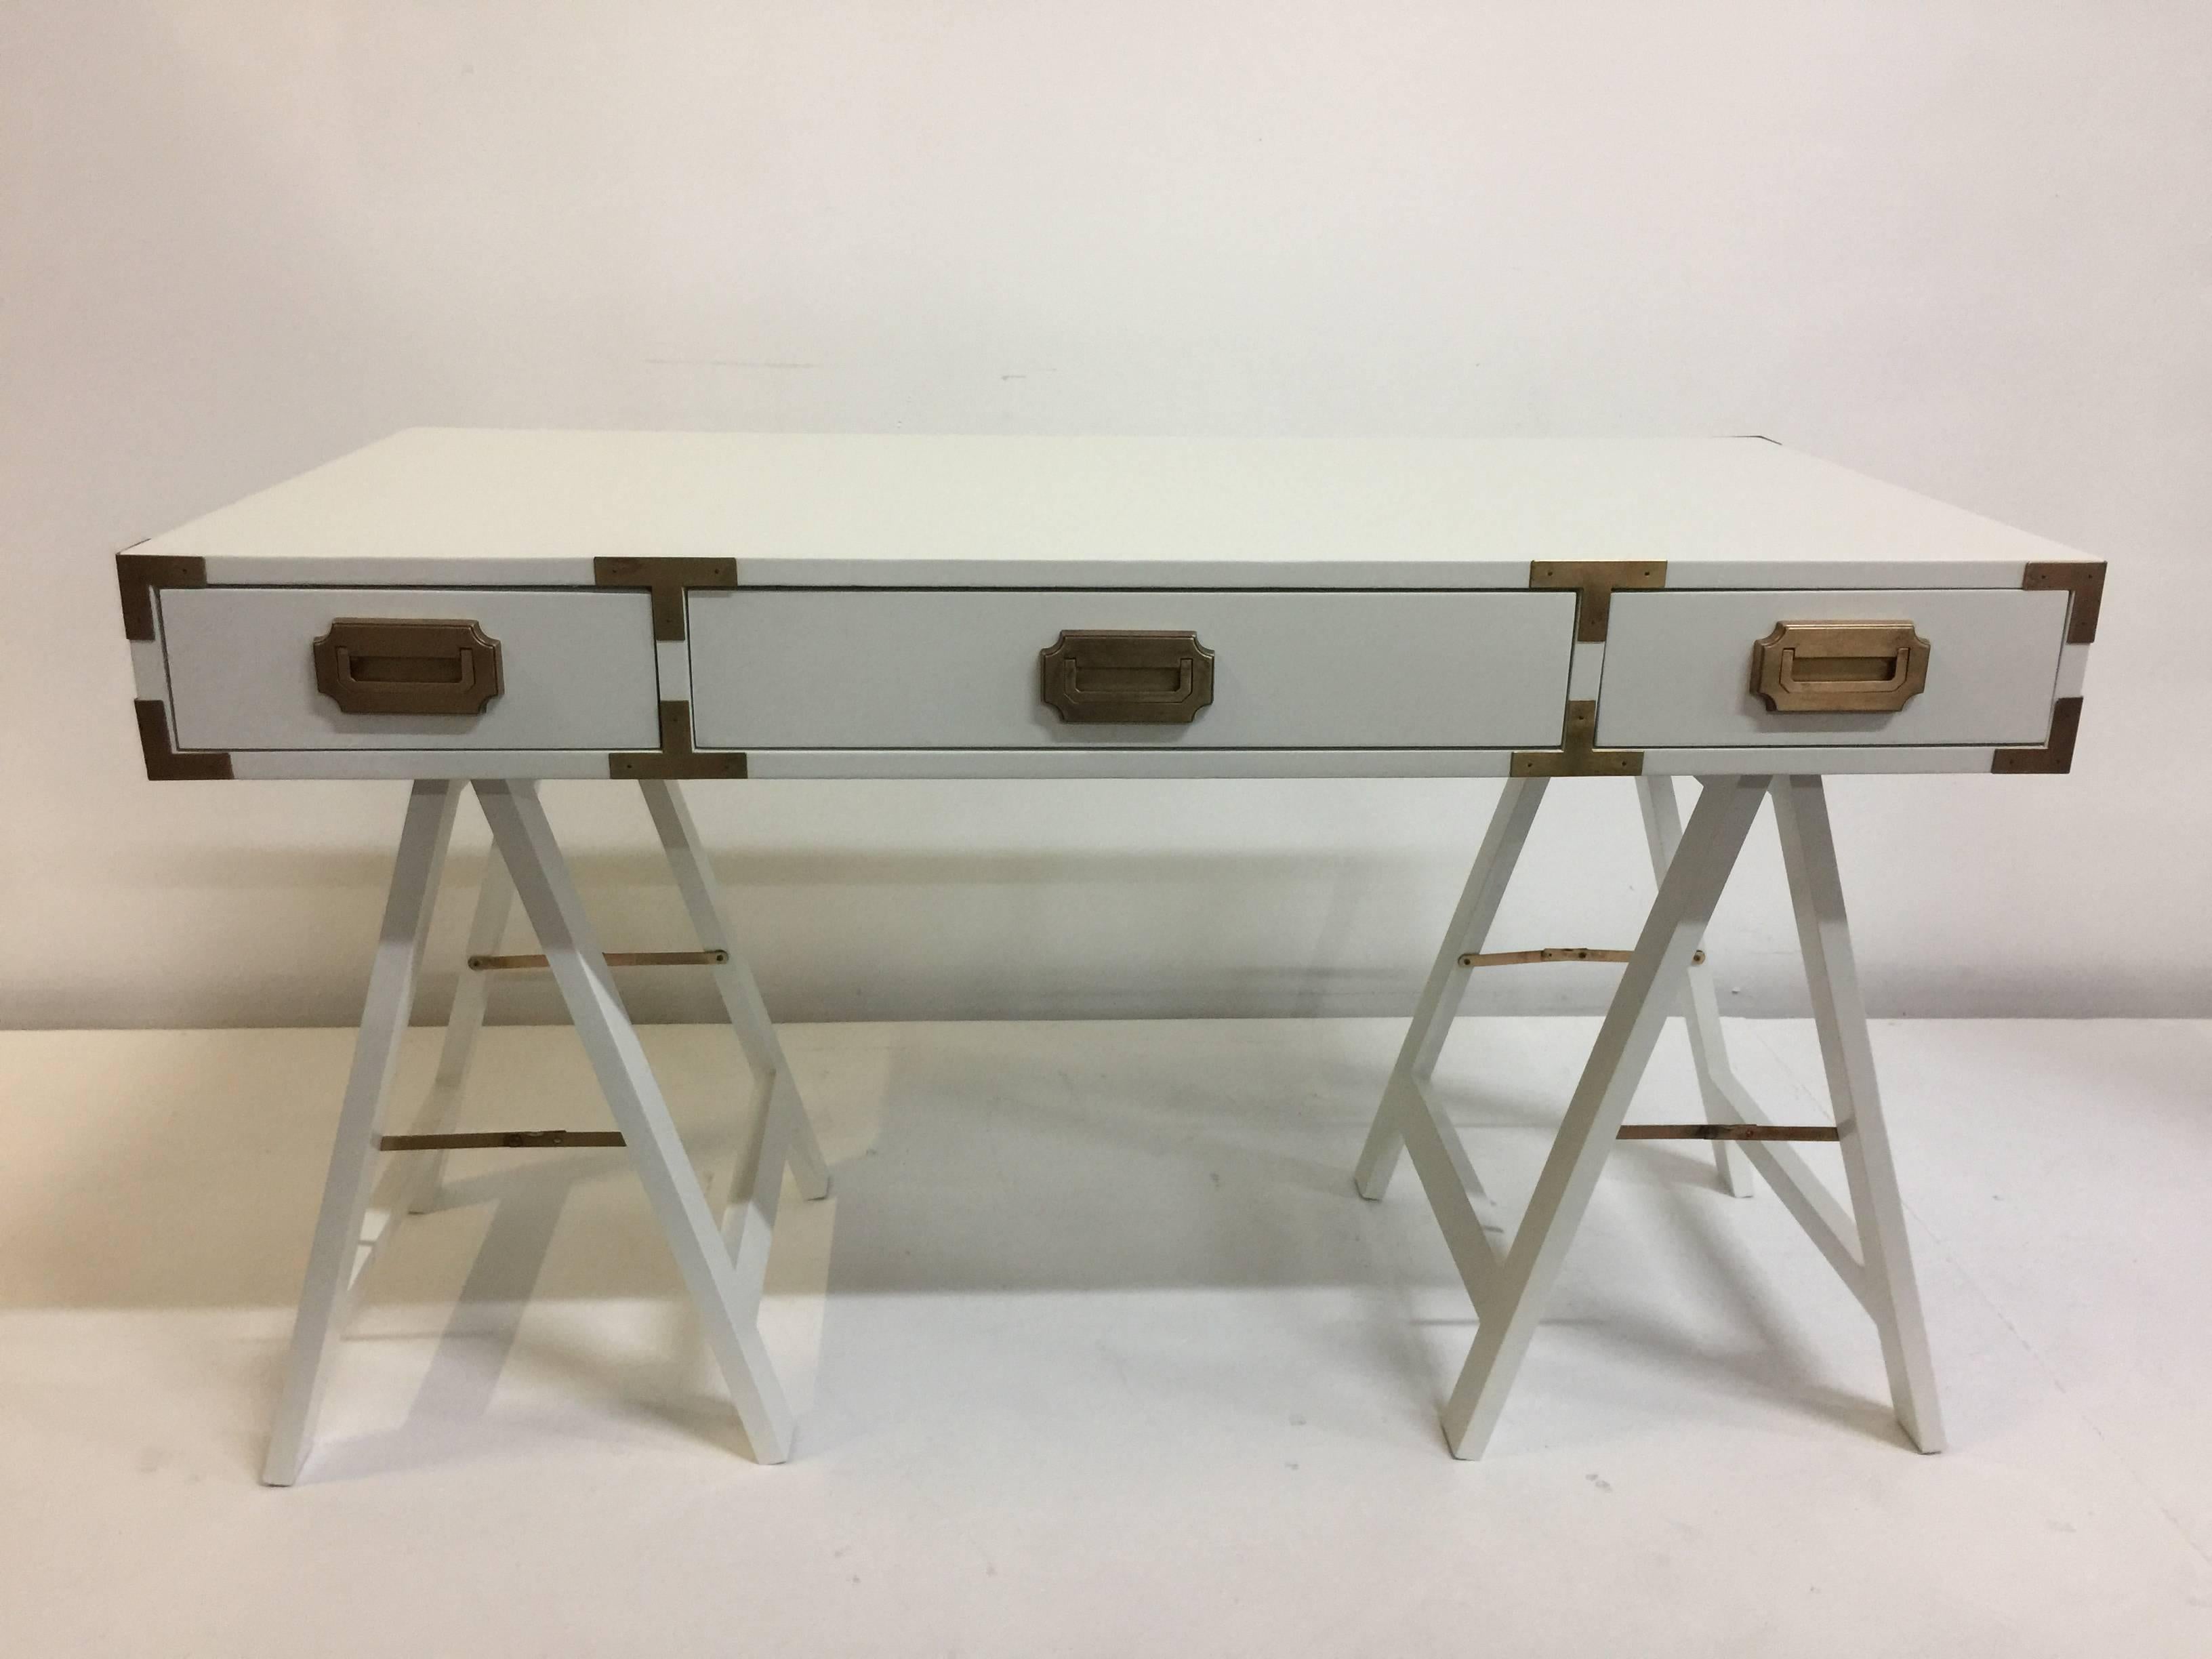 Lacquered in pristine white matte finish, this Campaign style desk sits upon trestle style sawhorse bases with original brass hardware. Three ample drawers open and close perfectly.